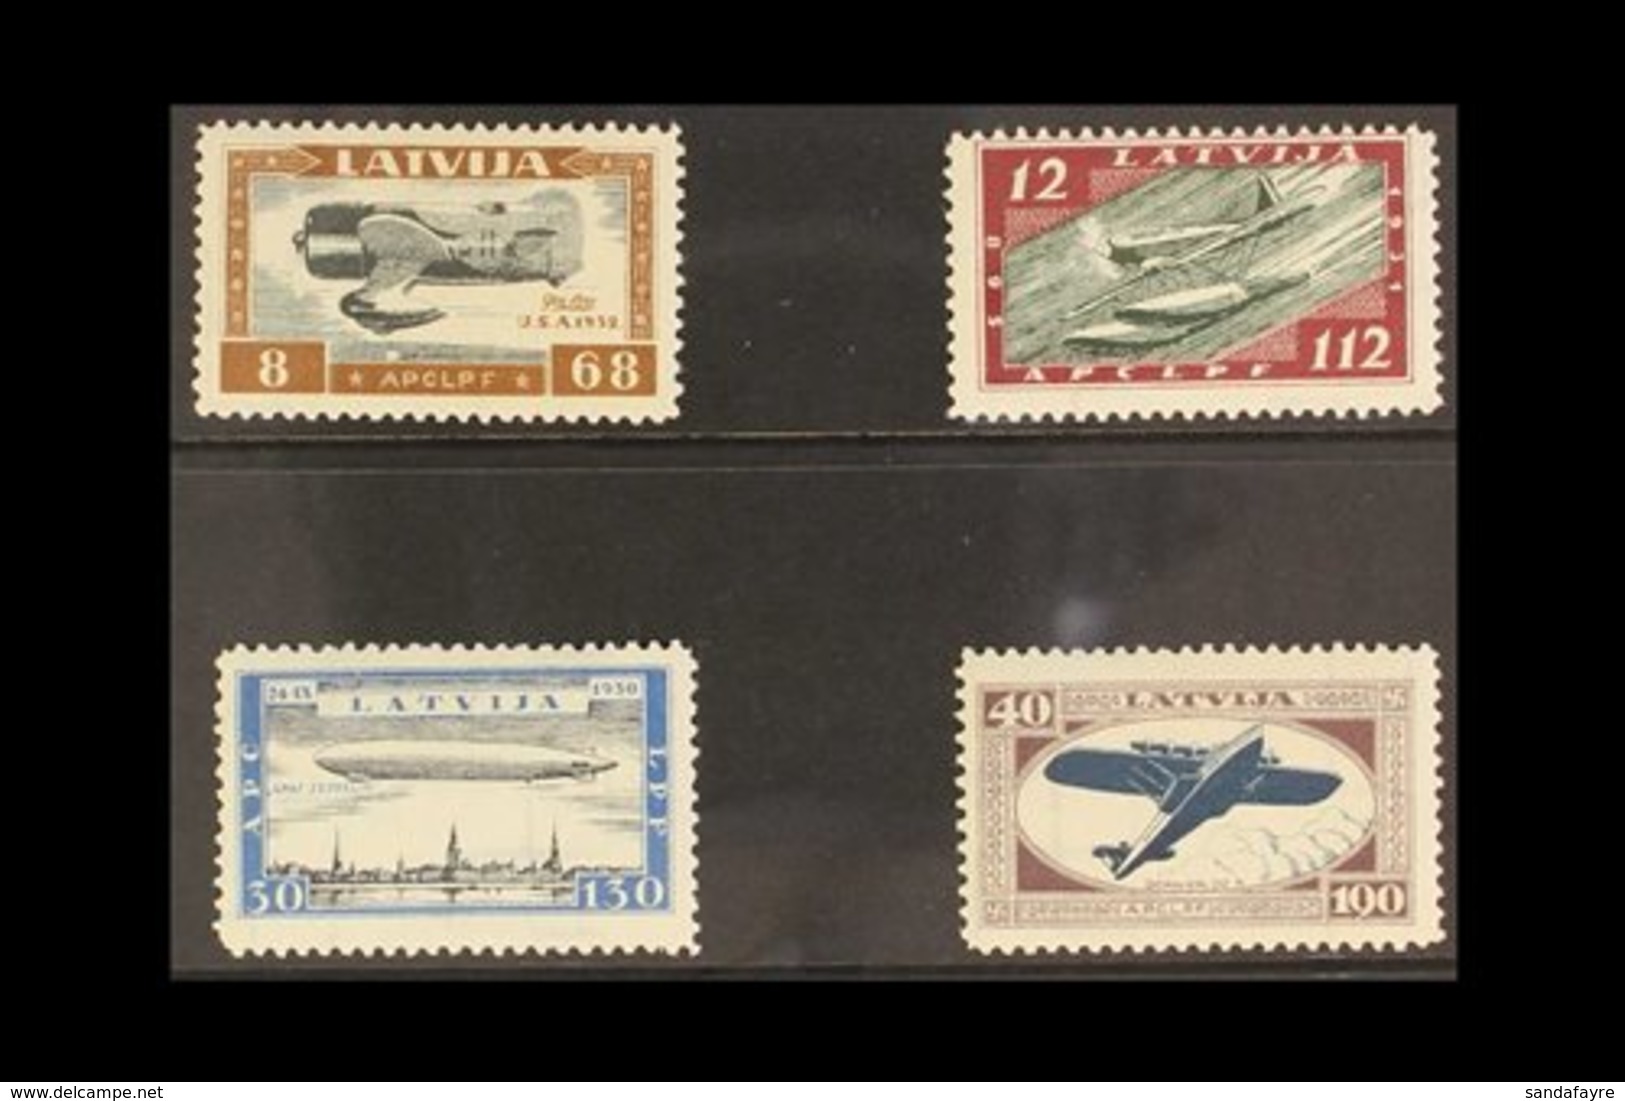 1933 Air Charity "Wounded Latvian Airmen Fund" Perforated Set, SG 243A/46A, Mi 228A/31A, Fine Mint (4 Stamps) For More I - Lettonie